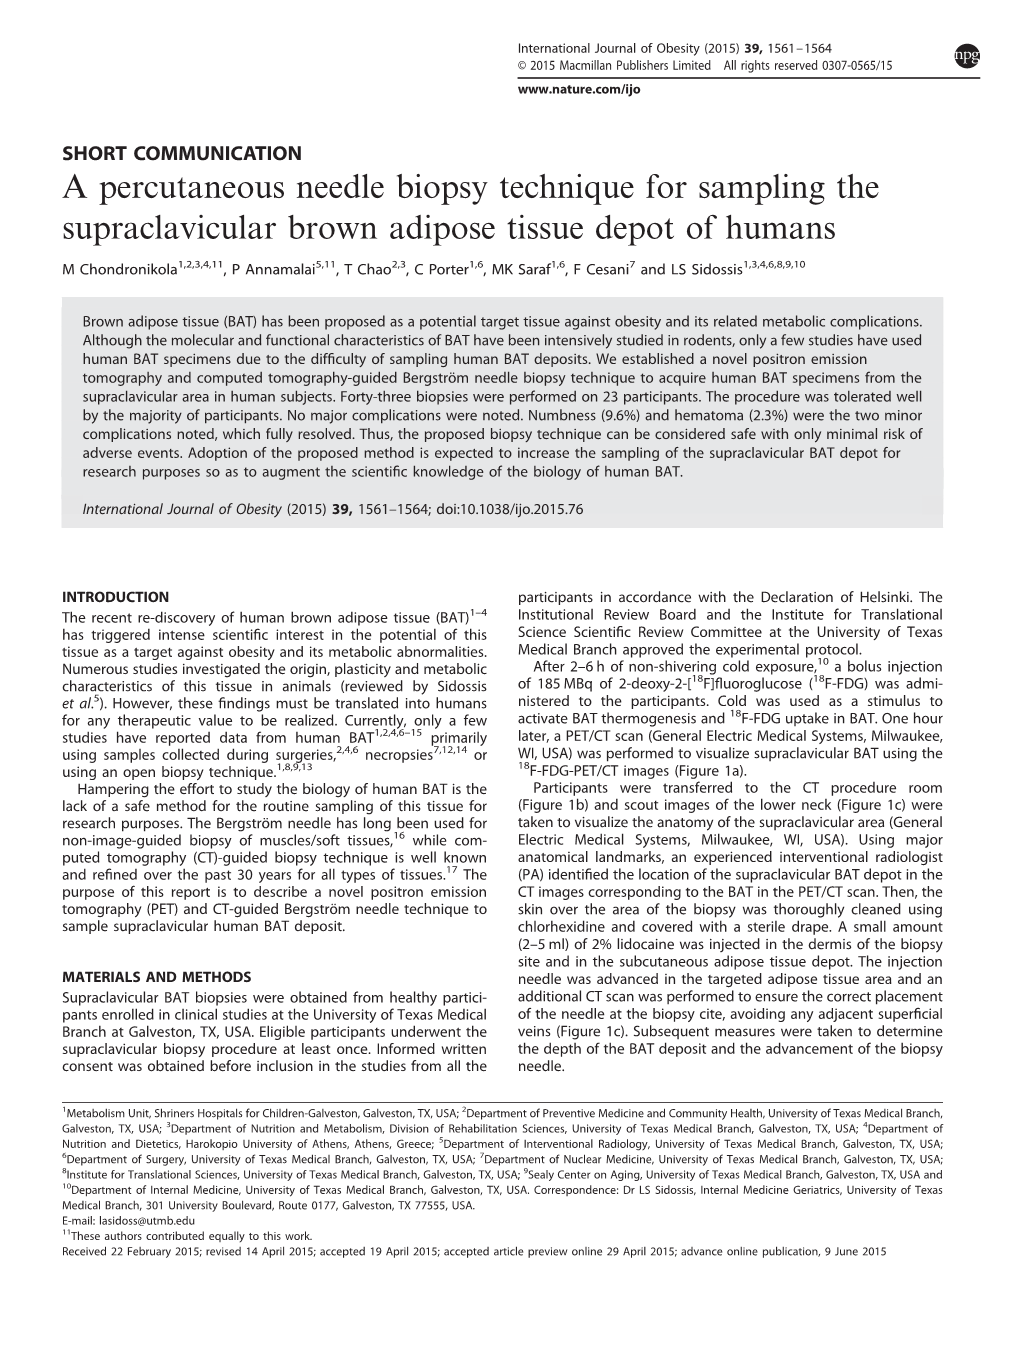 A Percutaneous Needle Biopsy Technique for Sampling the Supraclavicular Brown Adipose Tissue Depot of Humans